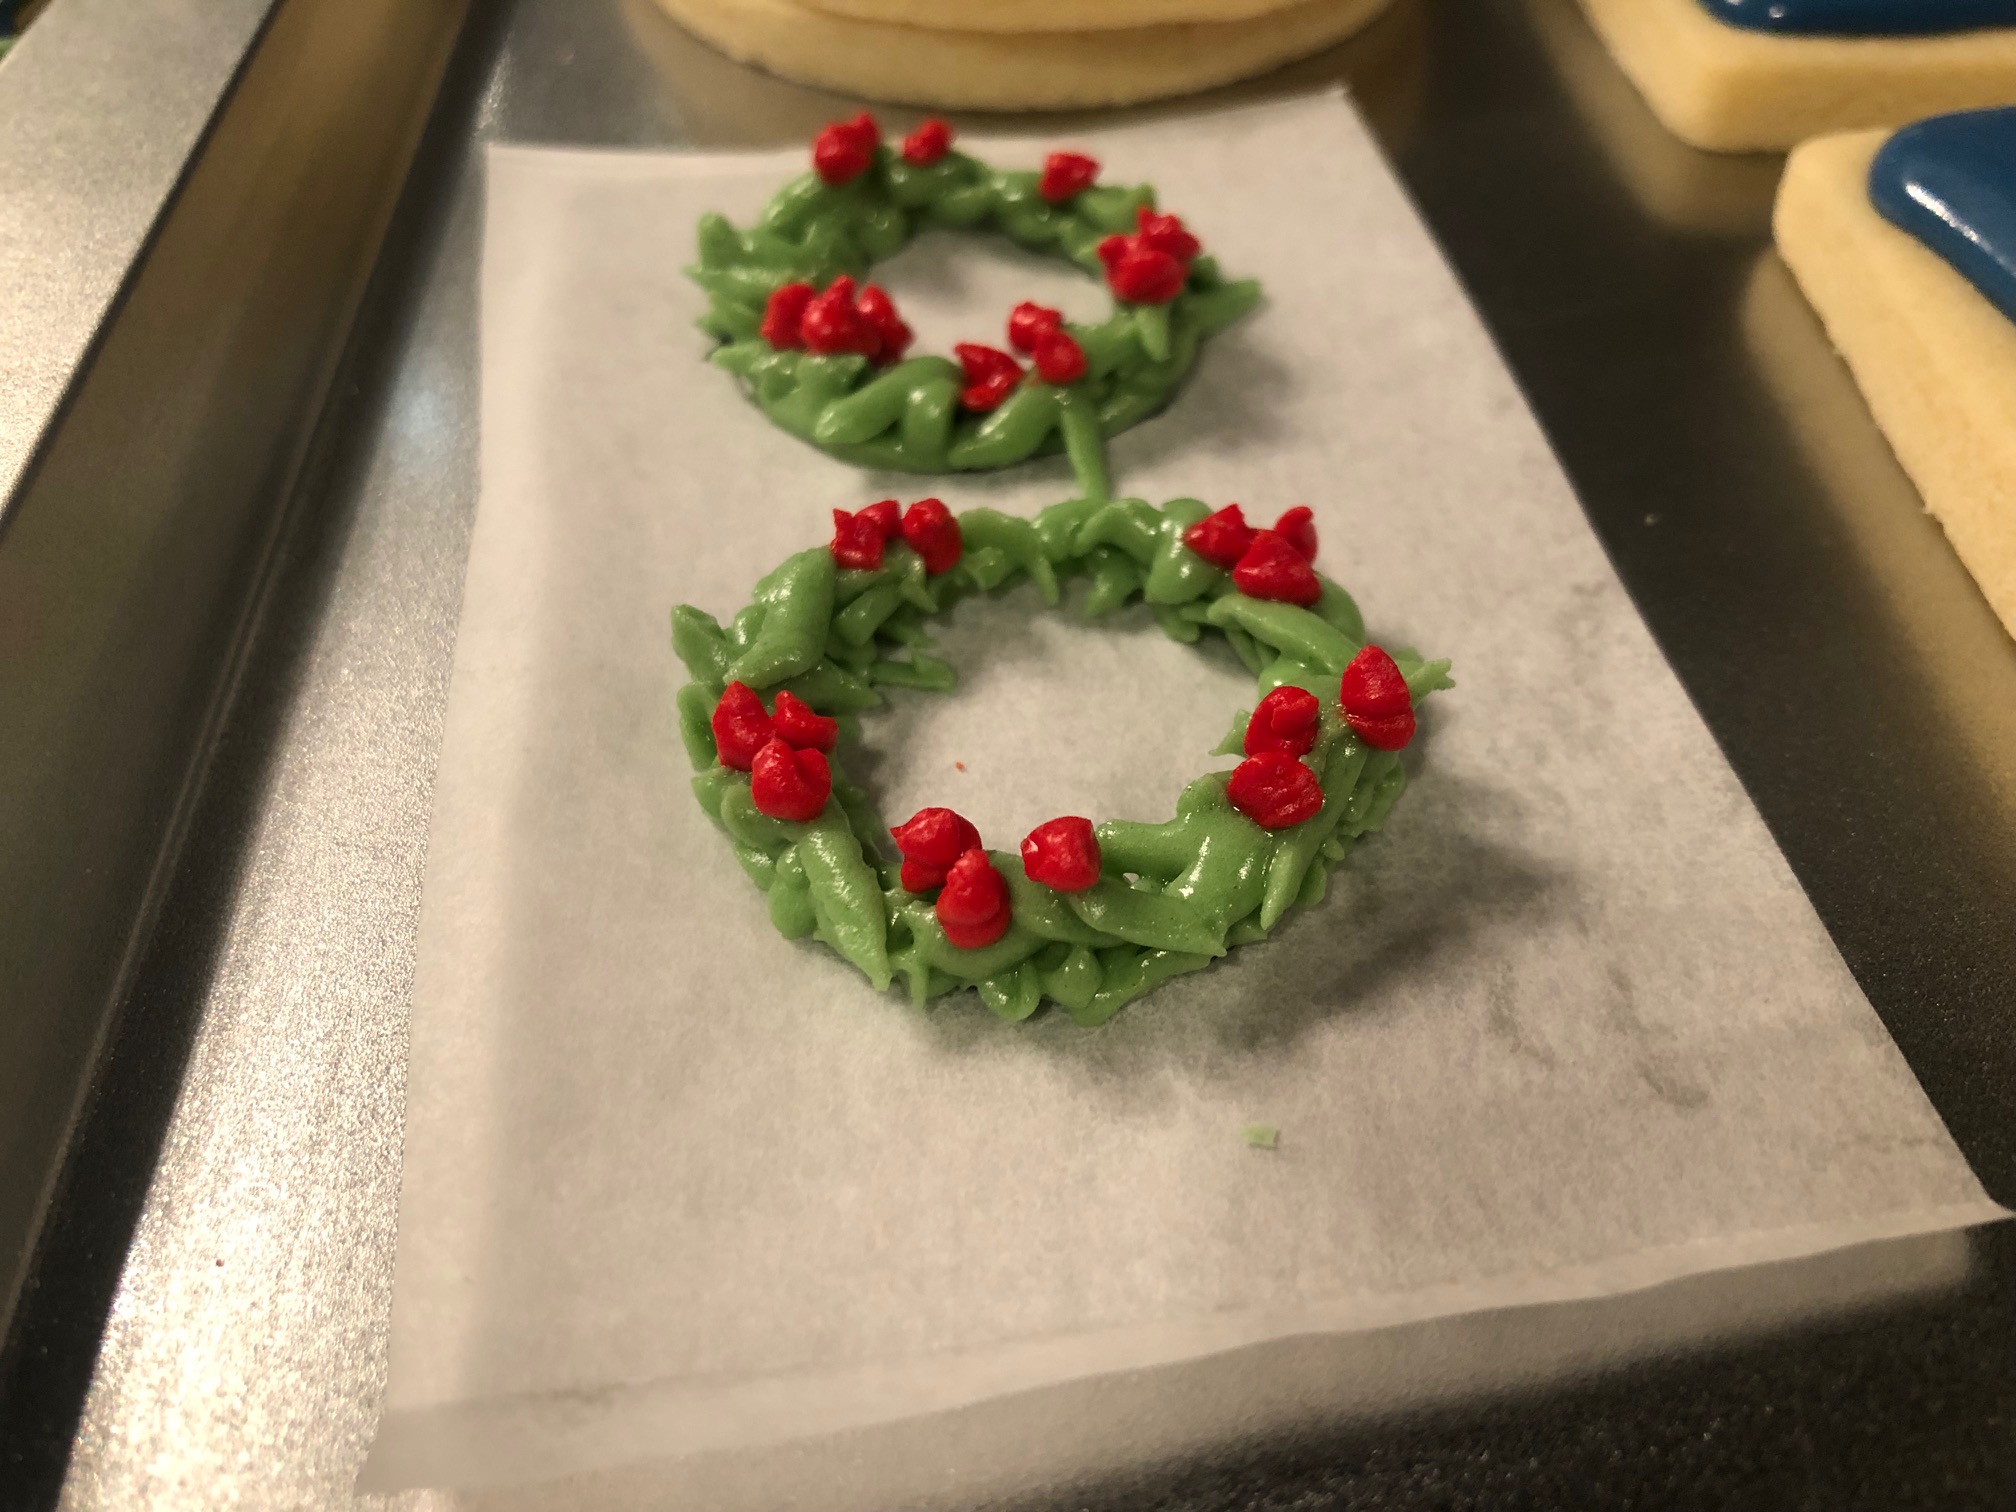 On a metal pan, two wreaths made out of icing with red circles sit on parchment paper. Photo by Alyssa Buckley.